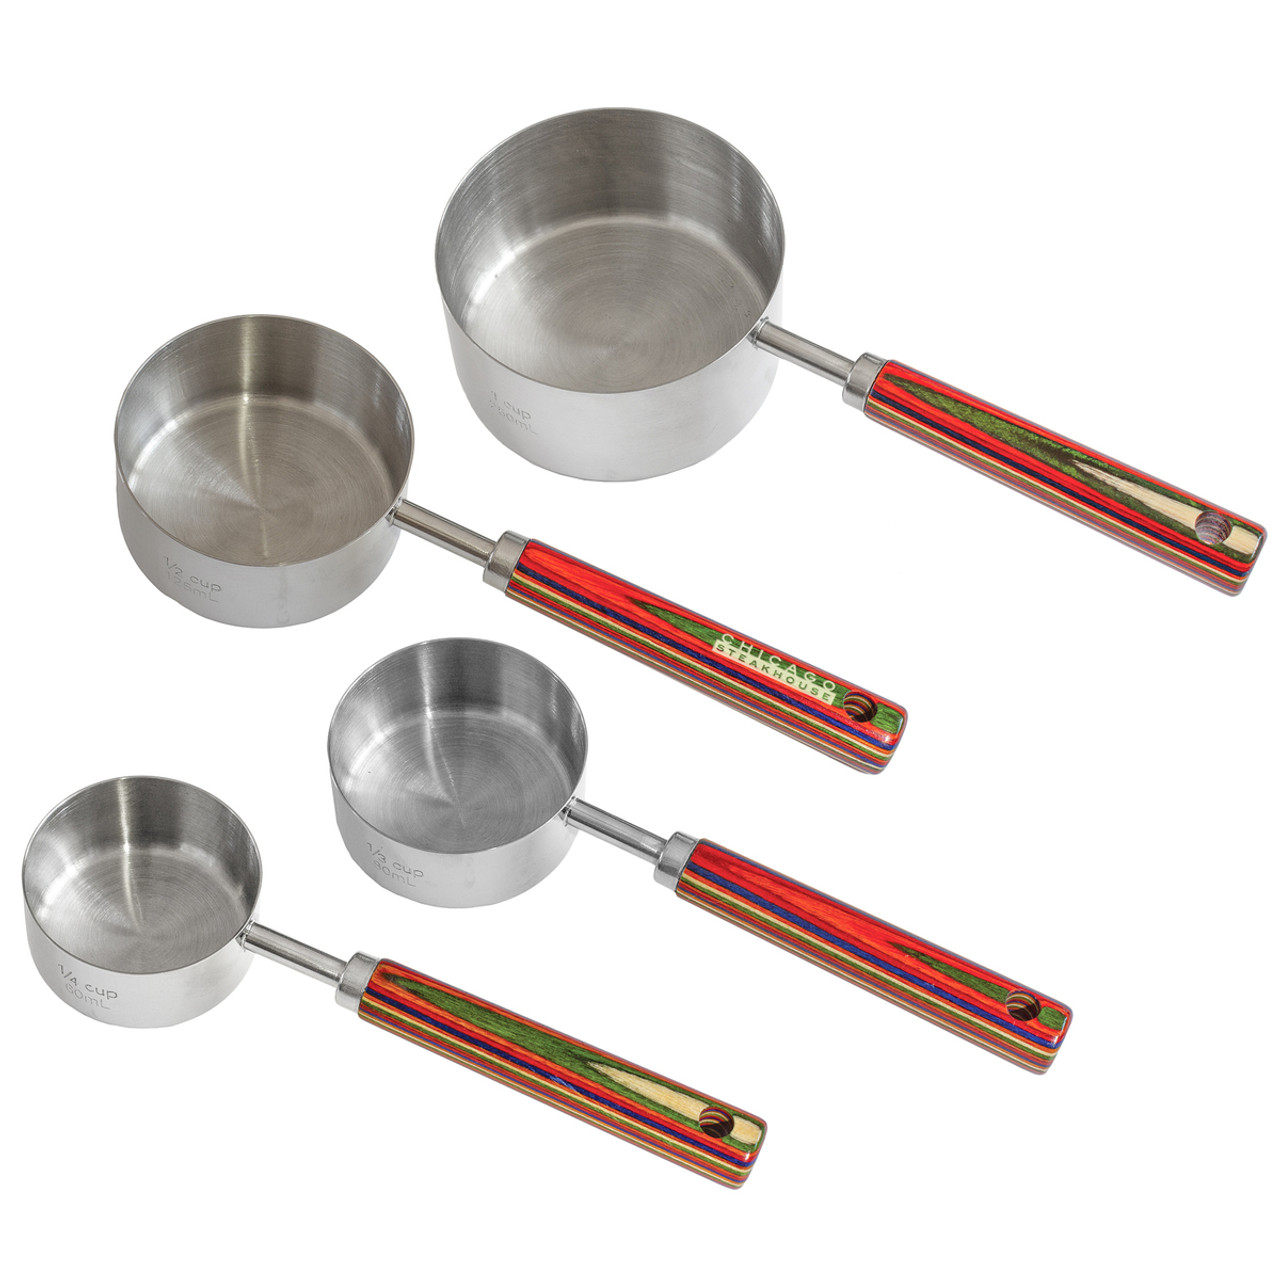 Stainless Steel Dry Measuring Cup Set, 4 Piece